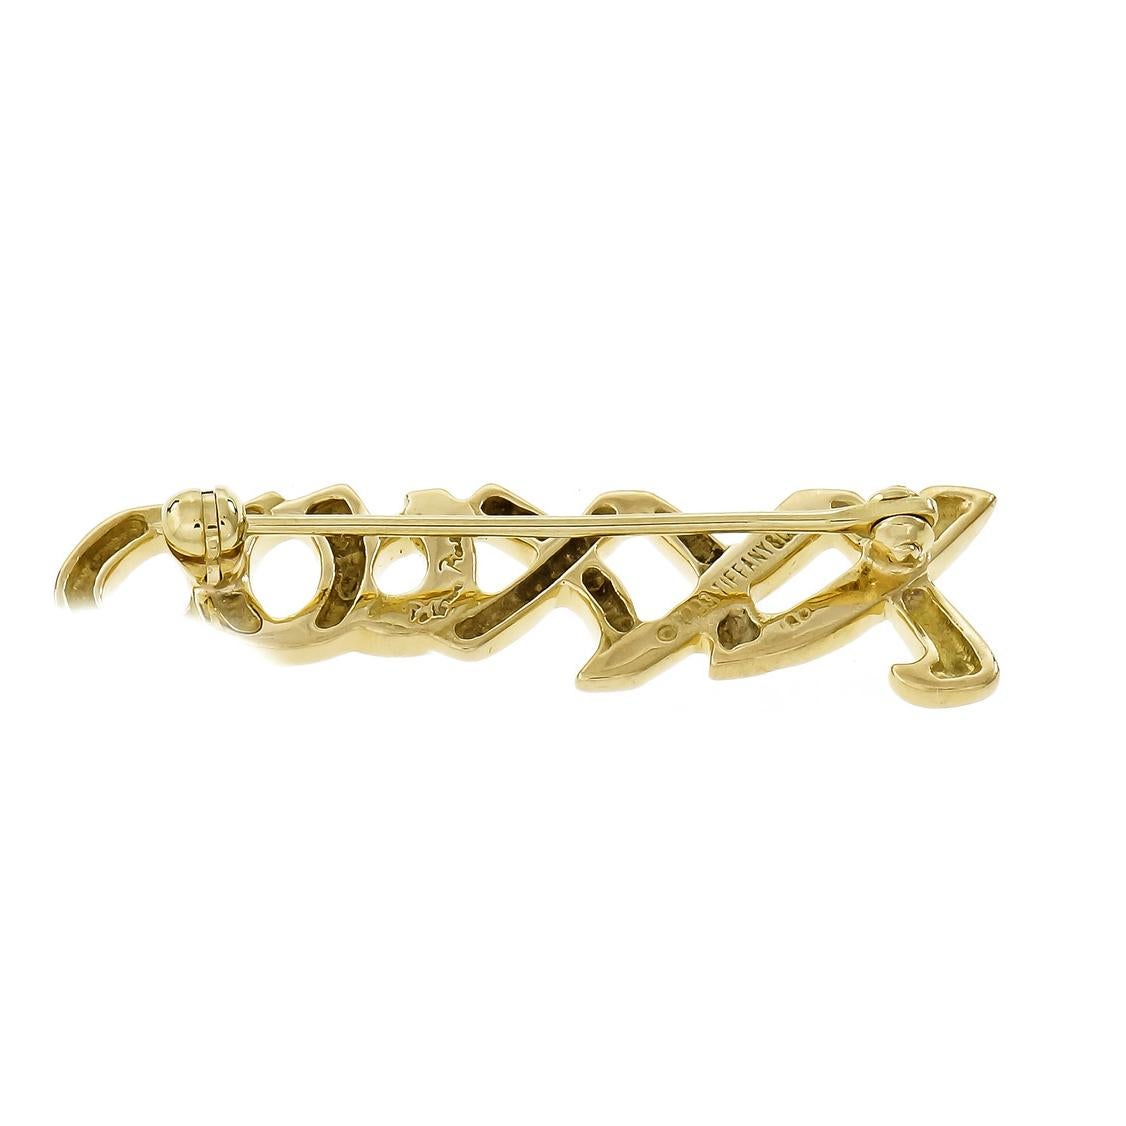 Tiffany & Co Paloma Picasso signature “XO” 18k yellow gold brooch.

18k yellow gold
Tested: 18k
Hallmark: Paloma Picasso Tiffany & Co © 1993
5.0 grams
Top to bottom: 10.25mm or .40 inch
Width: 36.04mm or 1.42 inches
Depth: 2.04mm

